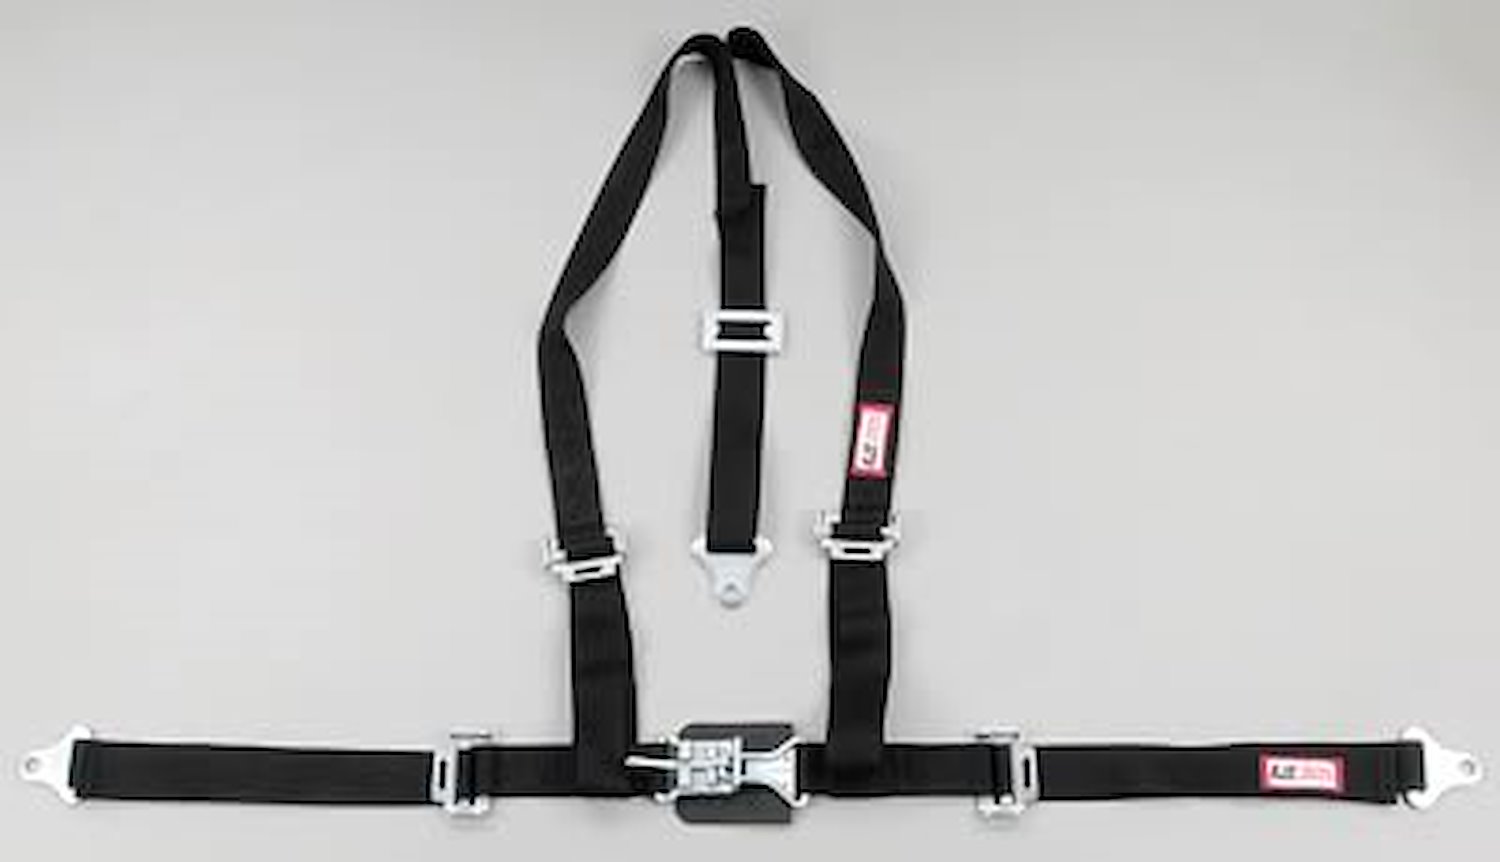 NON-SFI L&L HARNESS 3 PULL DOWN Lap Belt w/adjuster 2 S.H. V ROLL BAR Mount w/STERNUM STRAP ALL WRAP ENDS RED